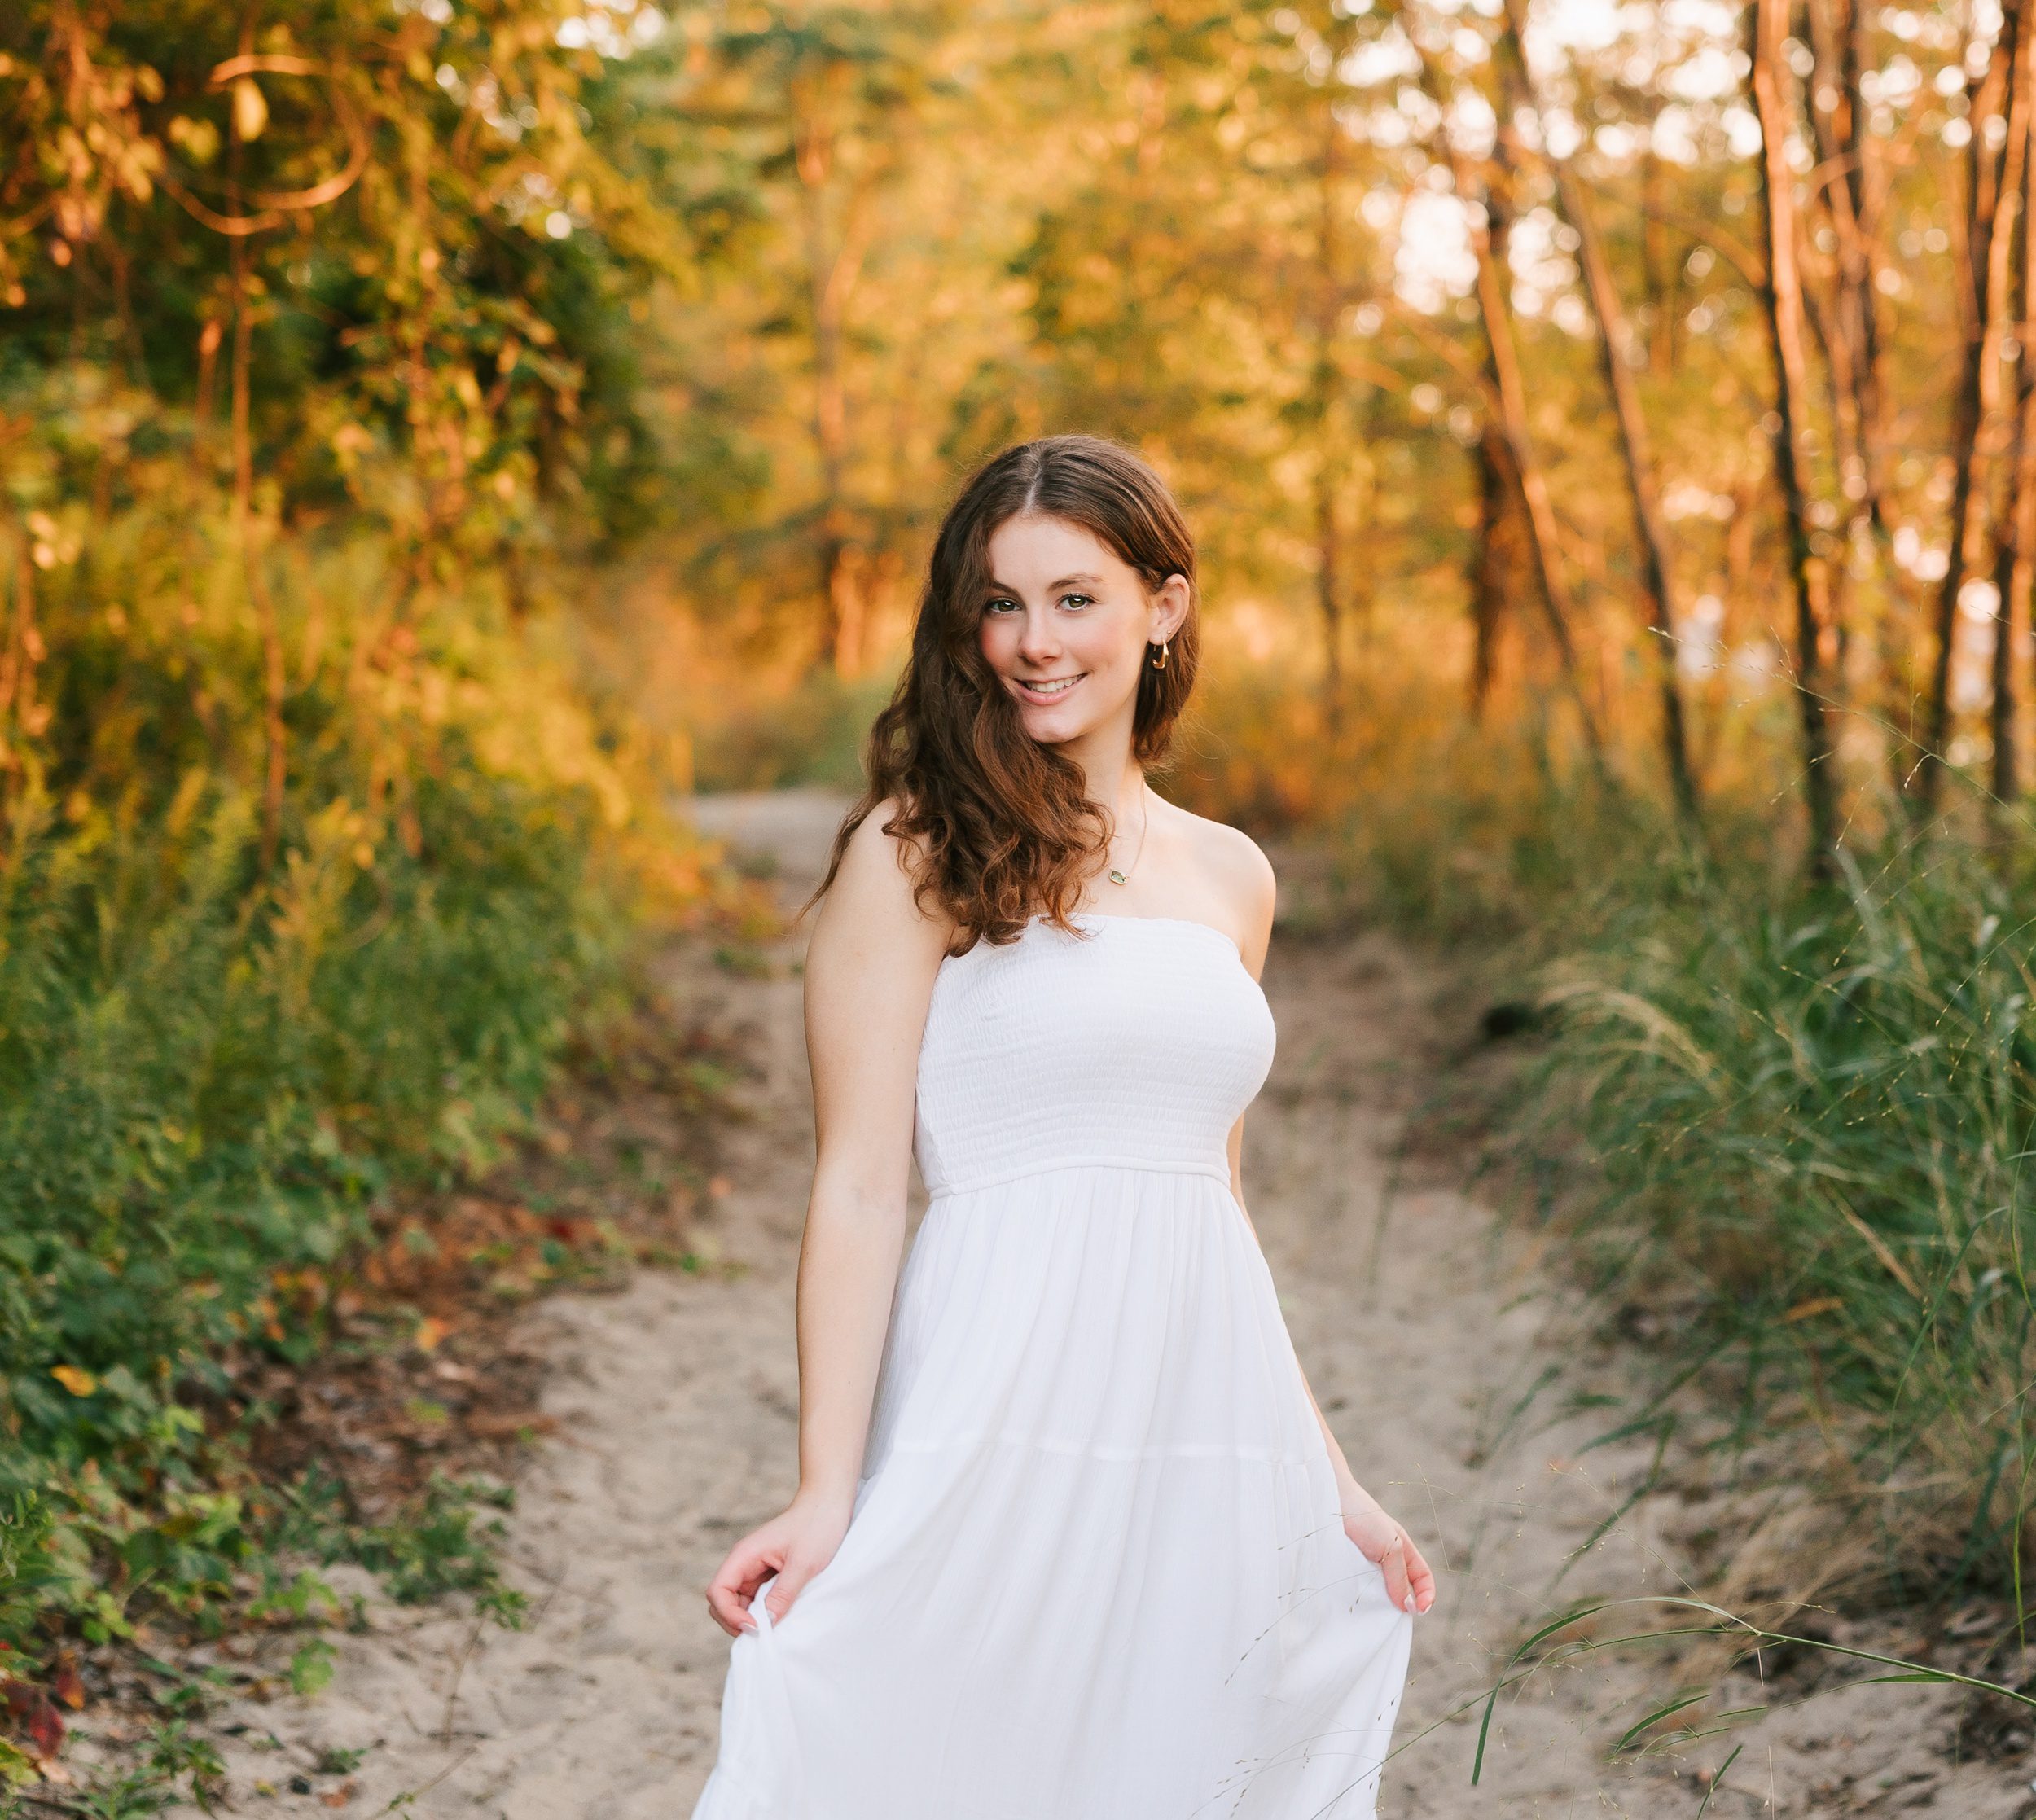 A high school senior in a white dress twirls in a beach trail at sunset while holding her dress